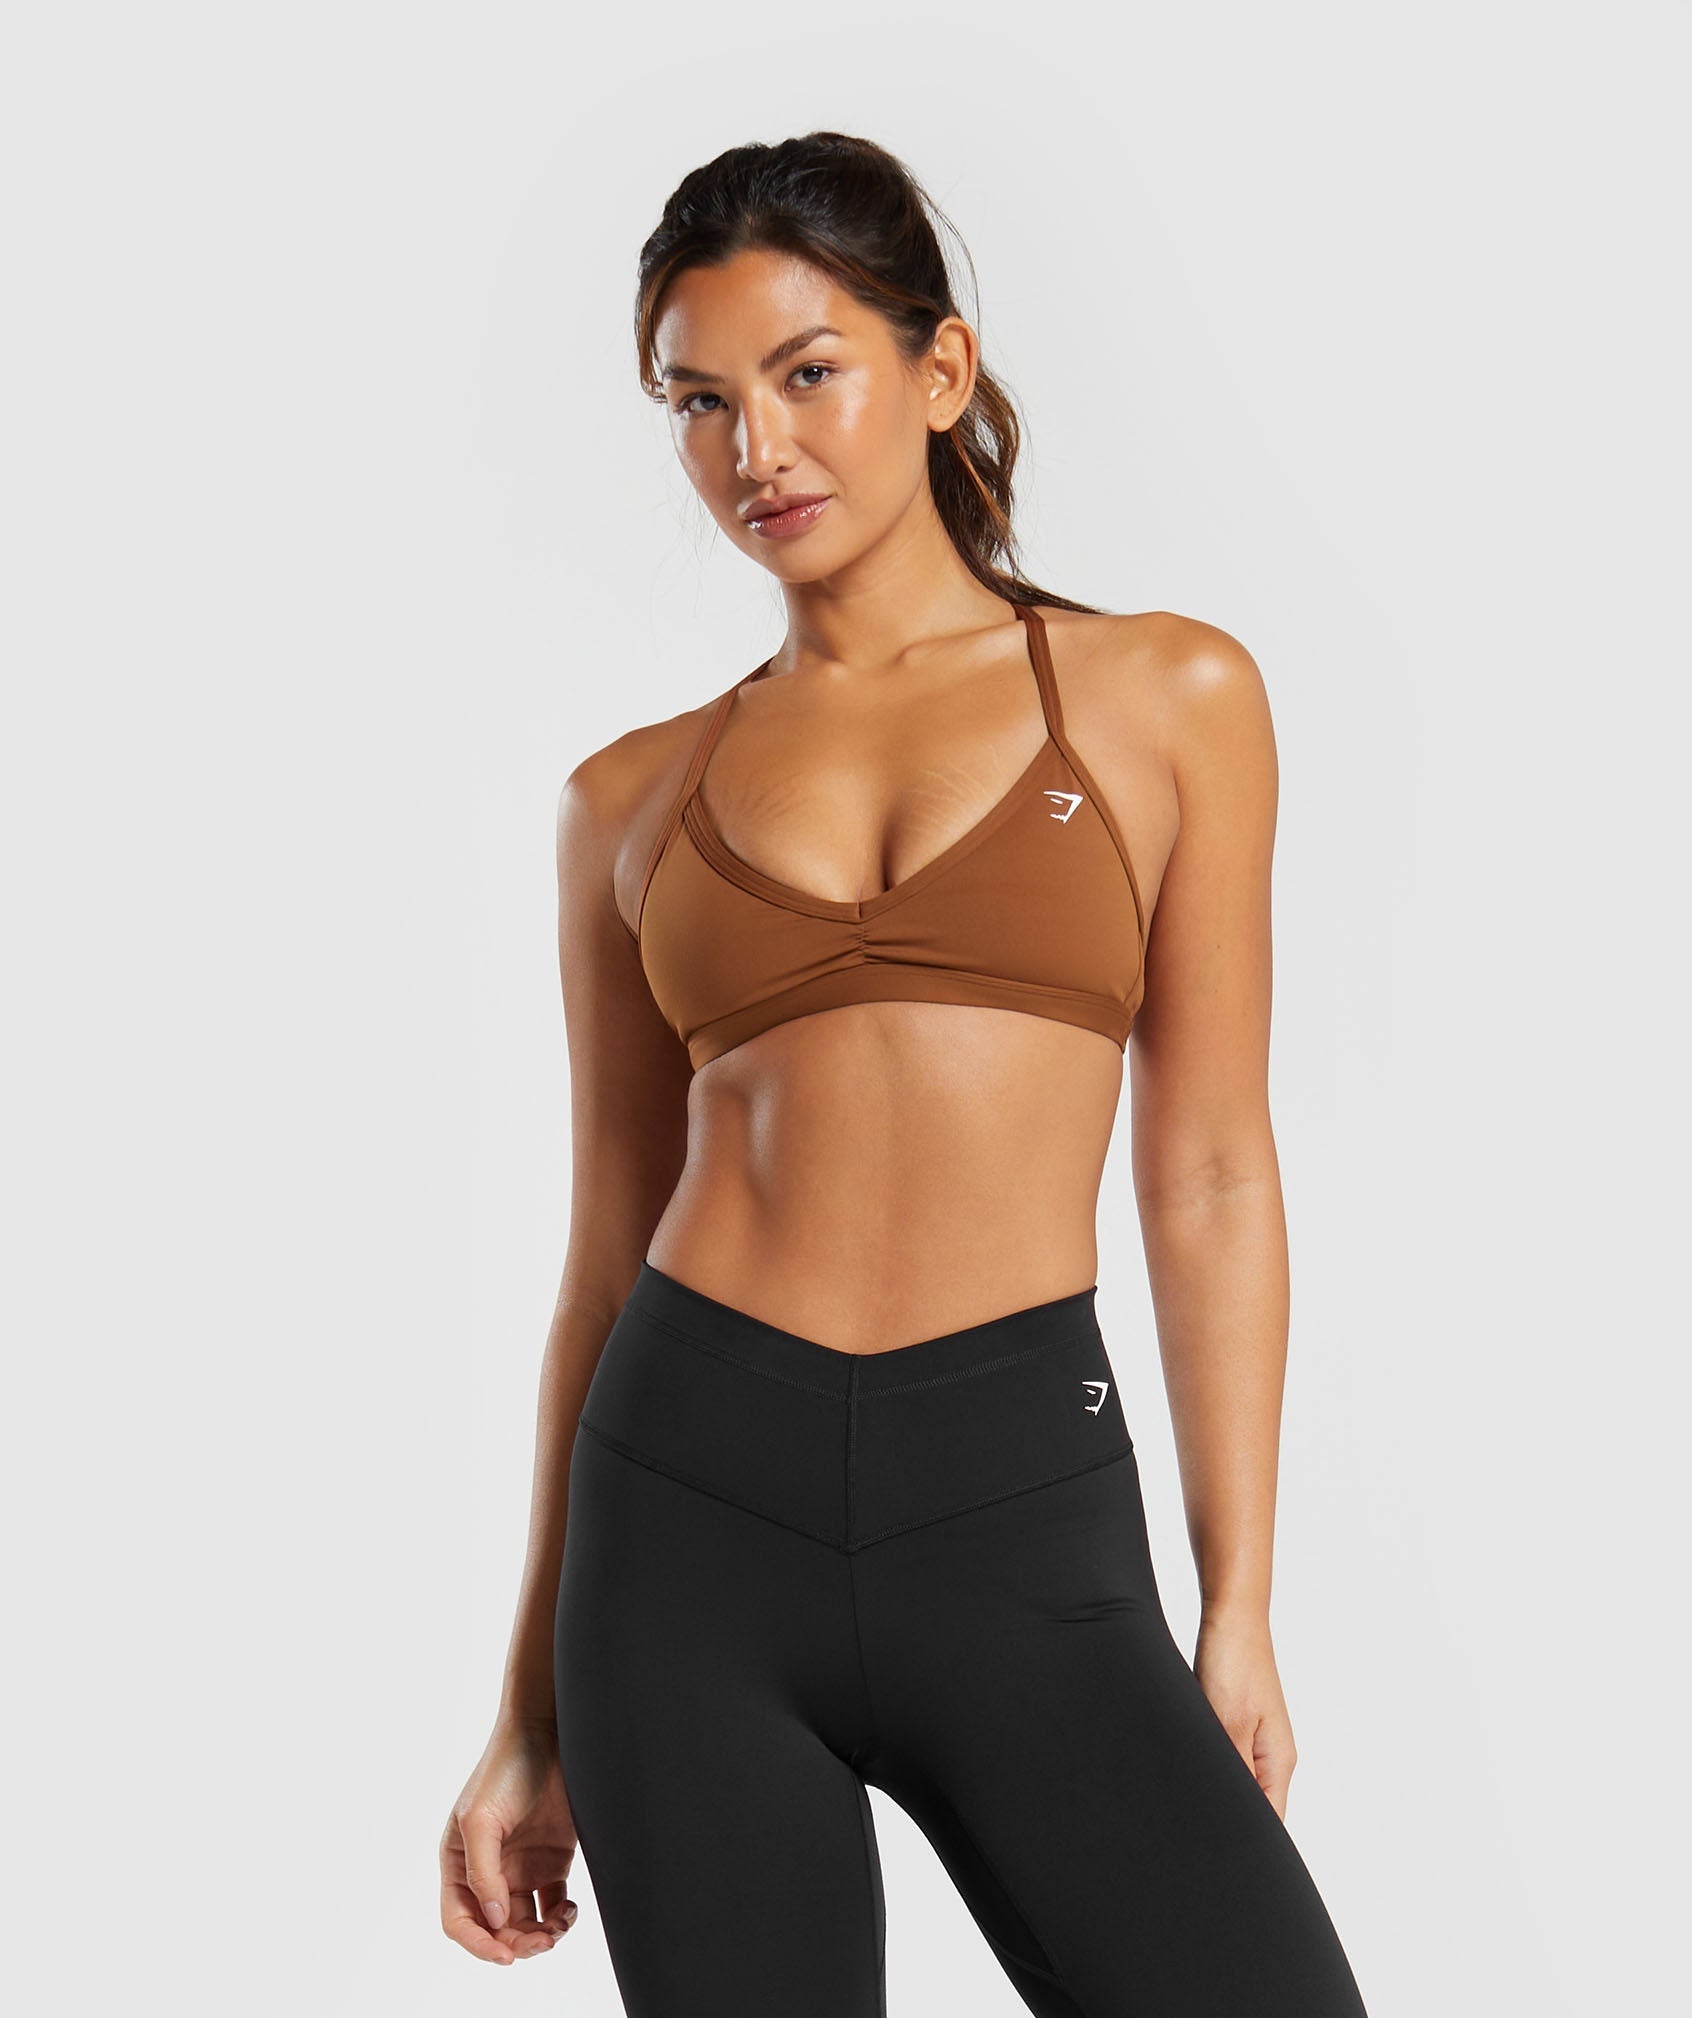 Gymshark Minimal Sports Bra Green - $38 New With Tags - From